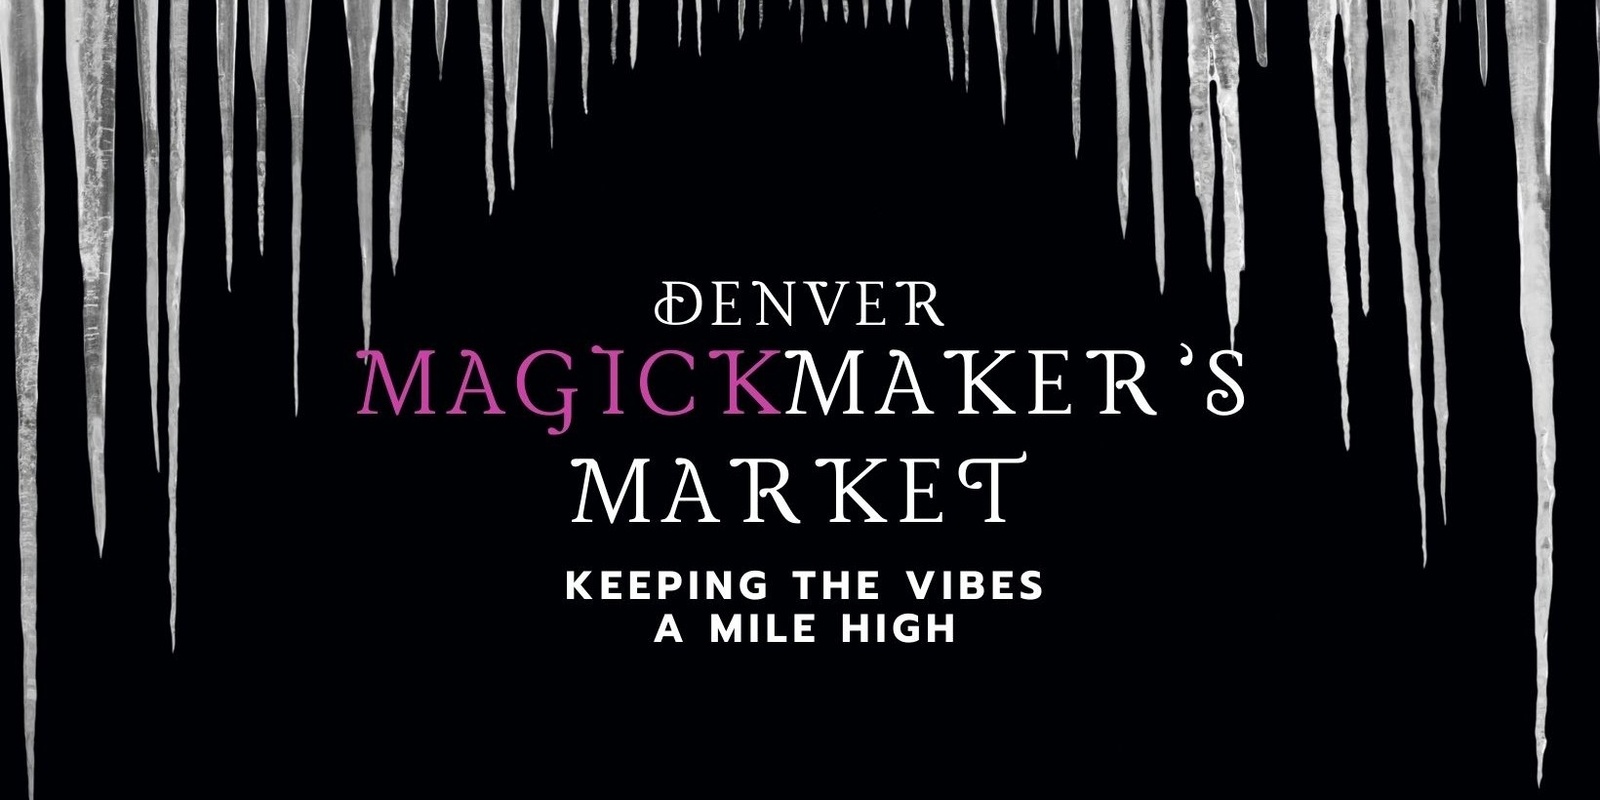 Banner image for MAY 19 - Pre- Full Moon Magick Maker's Market @ Prismajic's Night Owl Bar